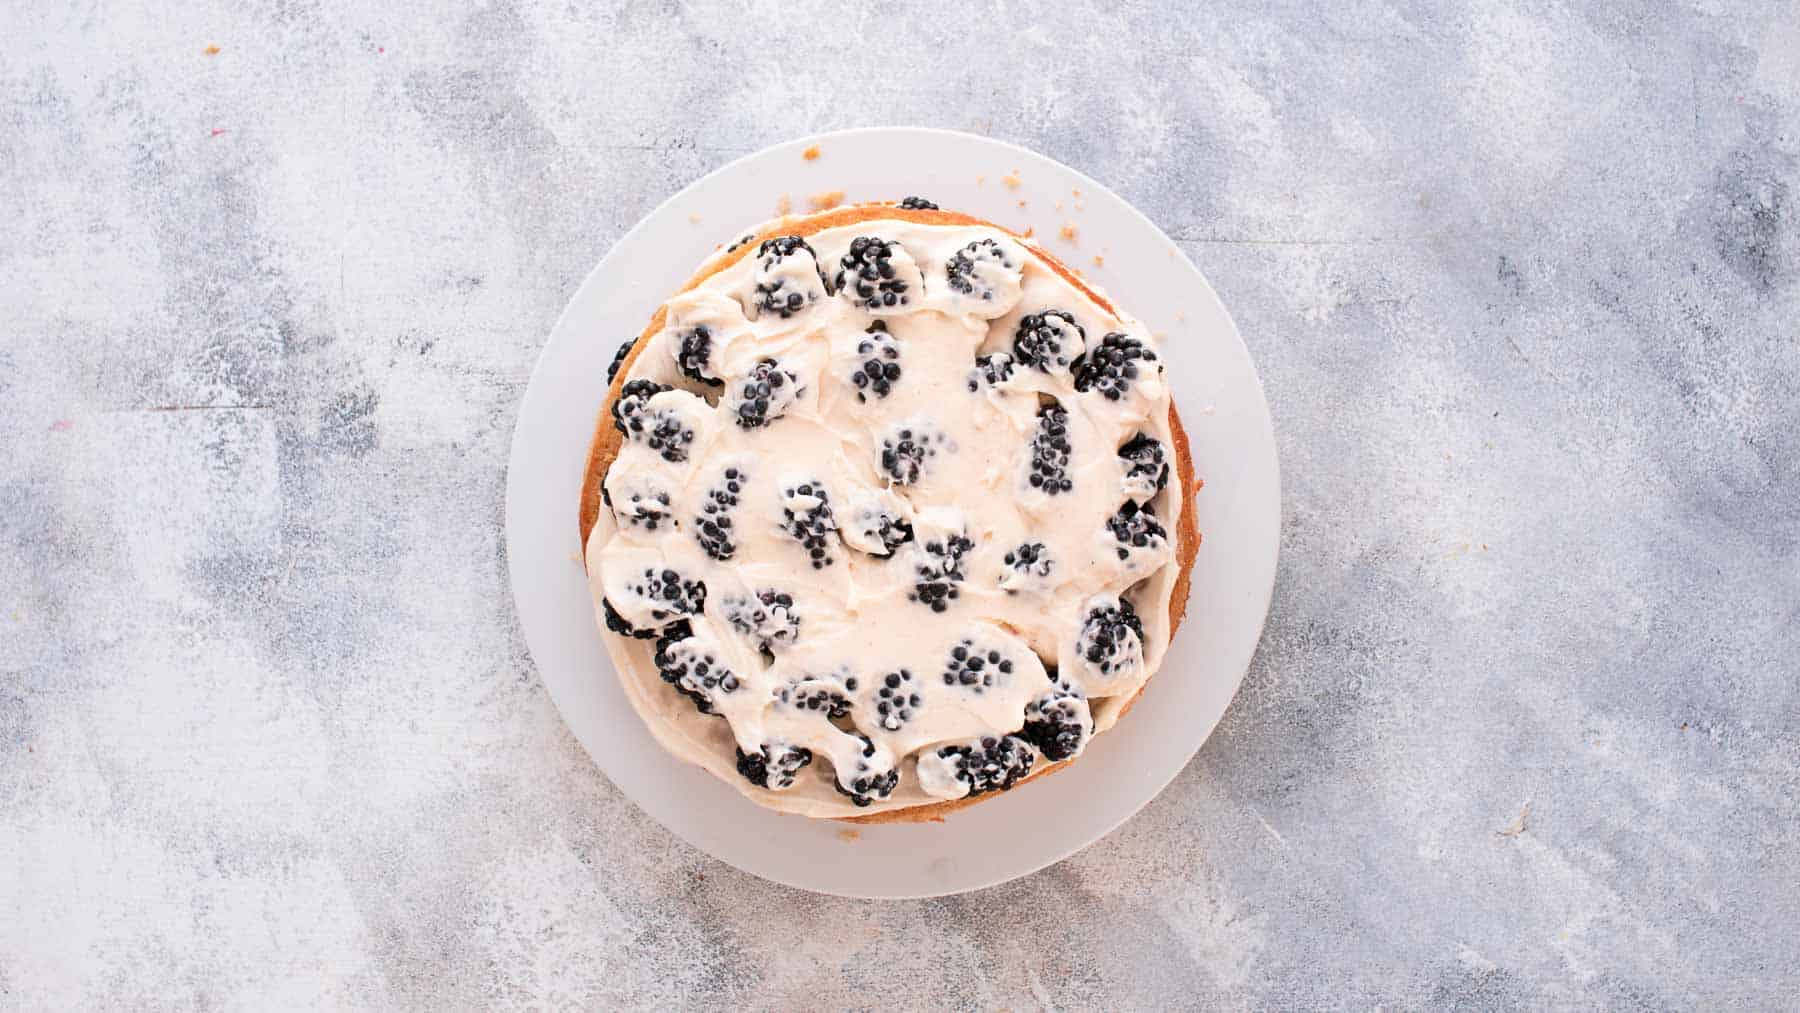 blackberries covered with cream cheese frosting on a cake layer